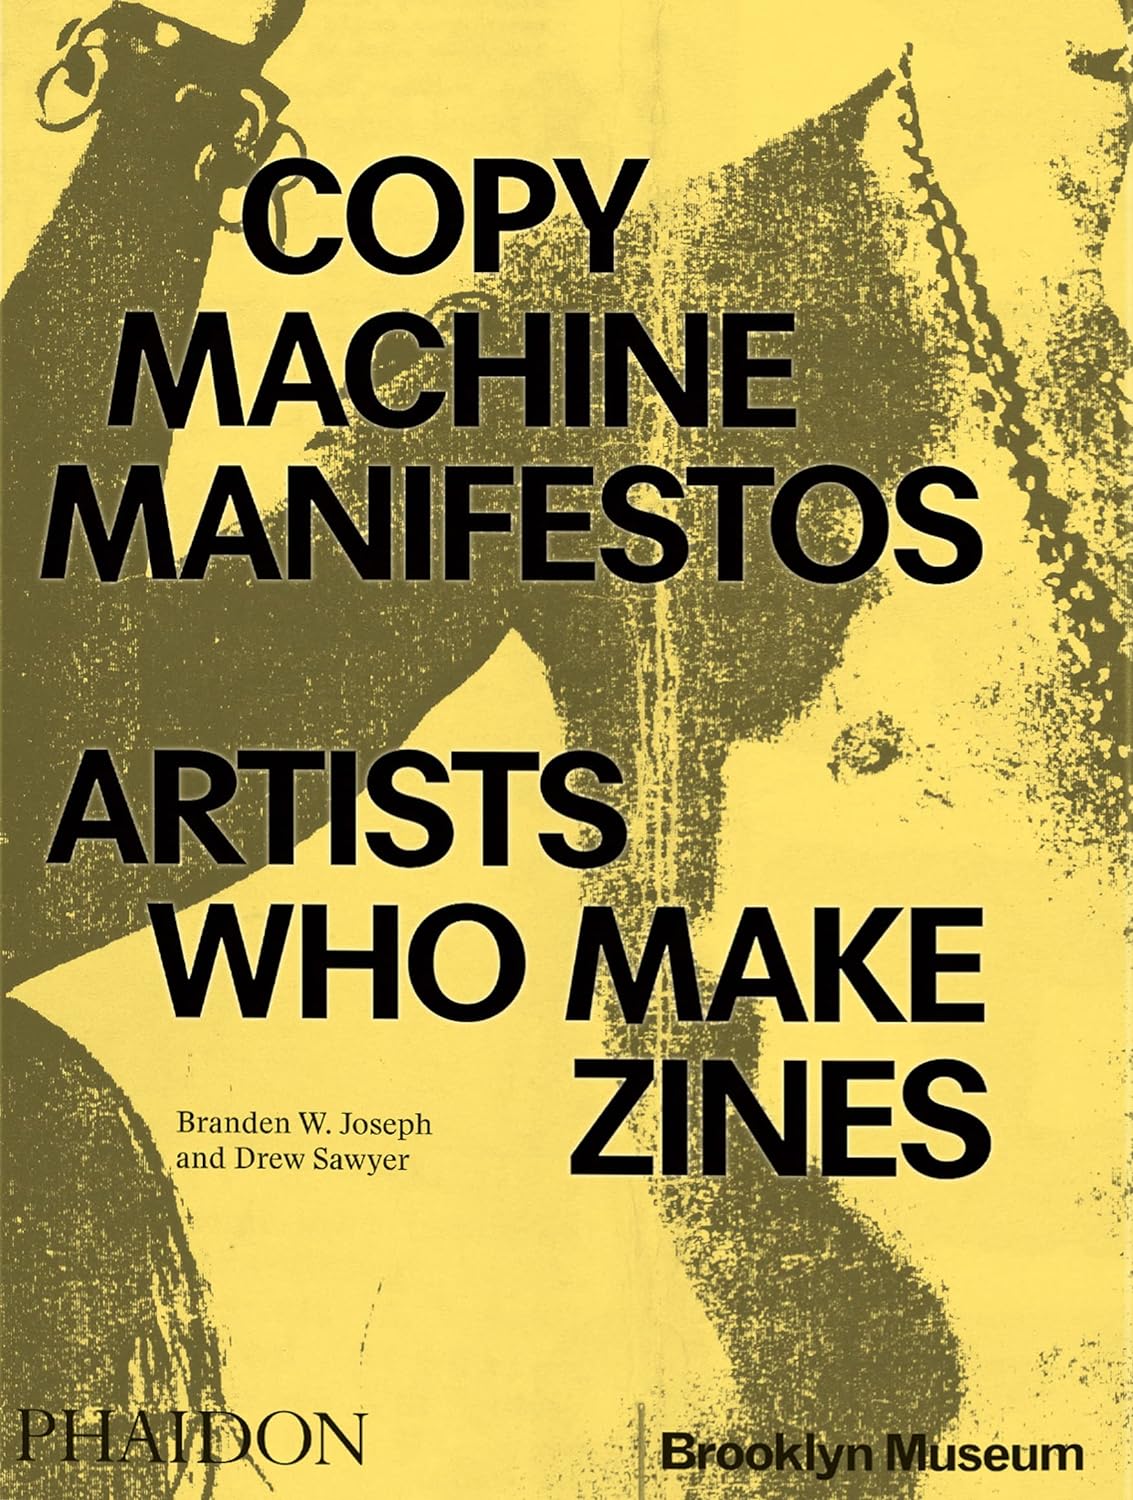 Copy Machine Manifestos: Artists and Their Zines – A Dive into the World of Zine Culture